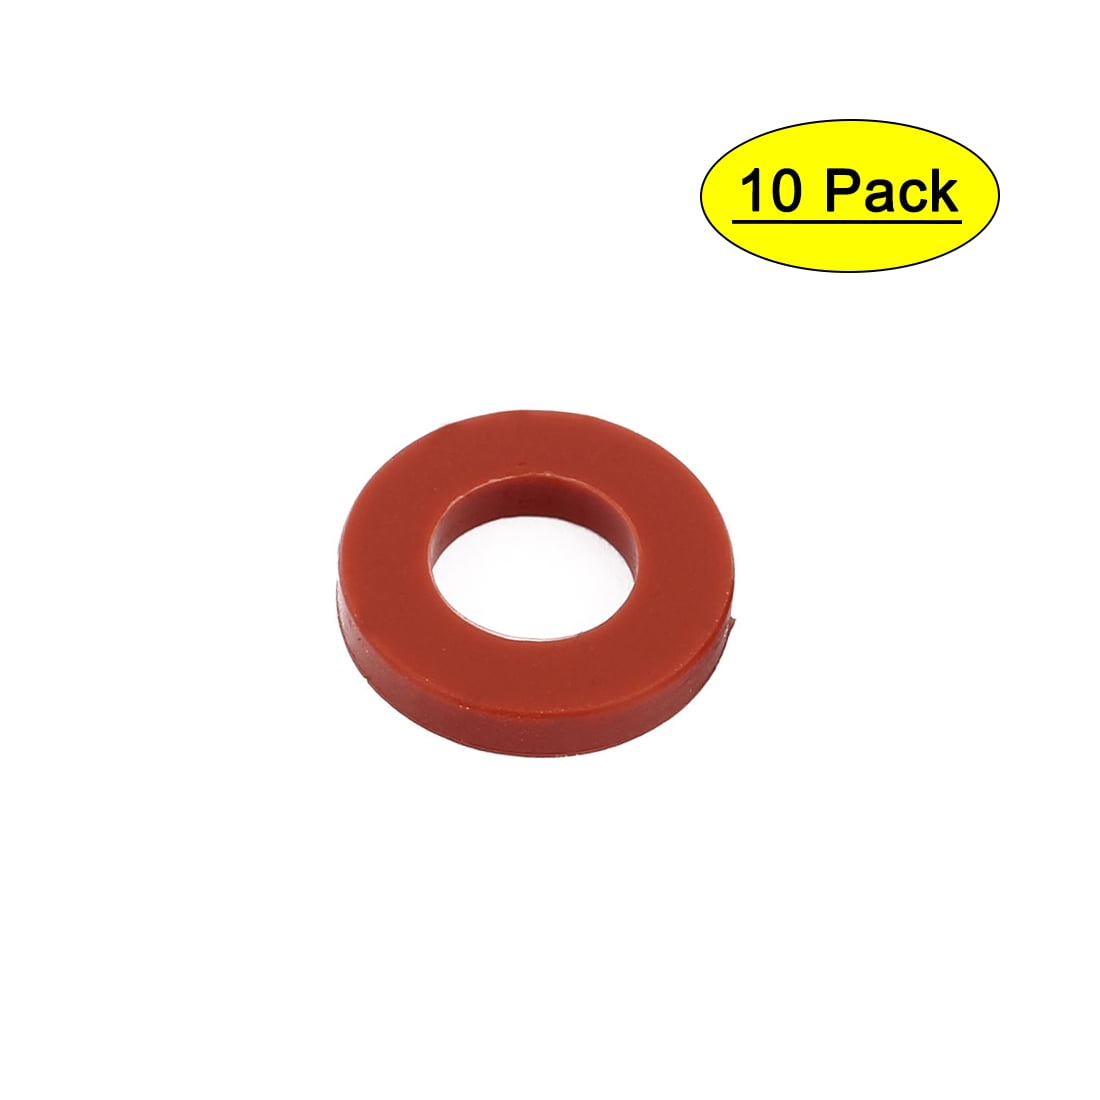 2 Pcs 60mm x 90mm x 2mm O-Ring Hose Gasket Silicone Washer SN-A 